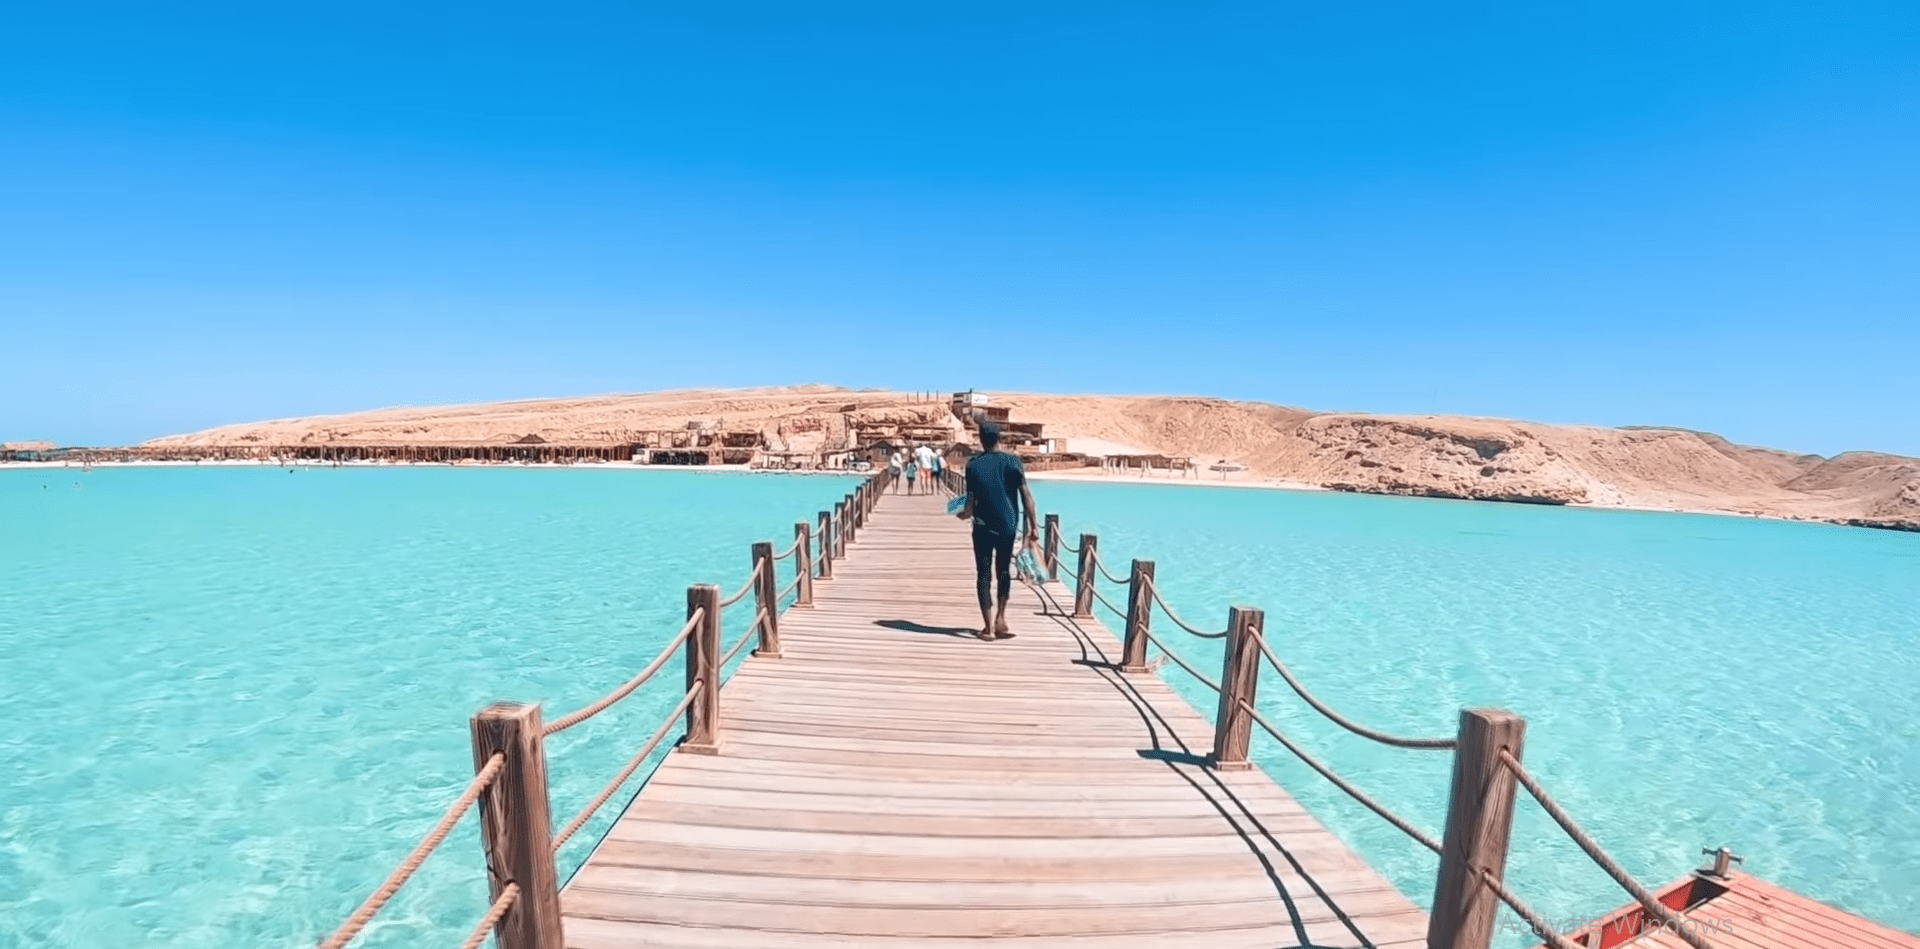 7 things to do in Hurghada